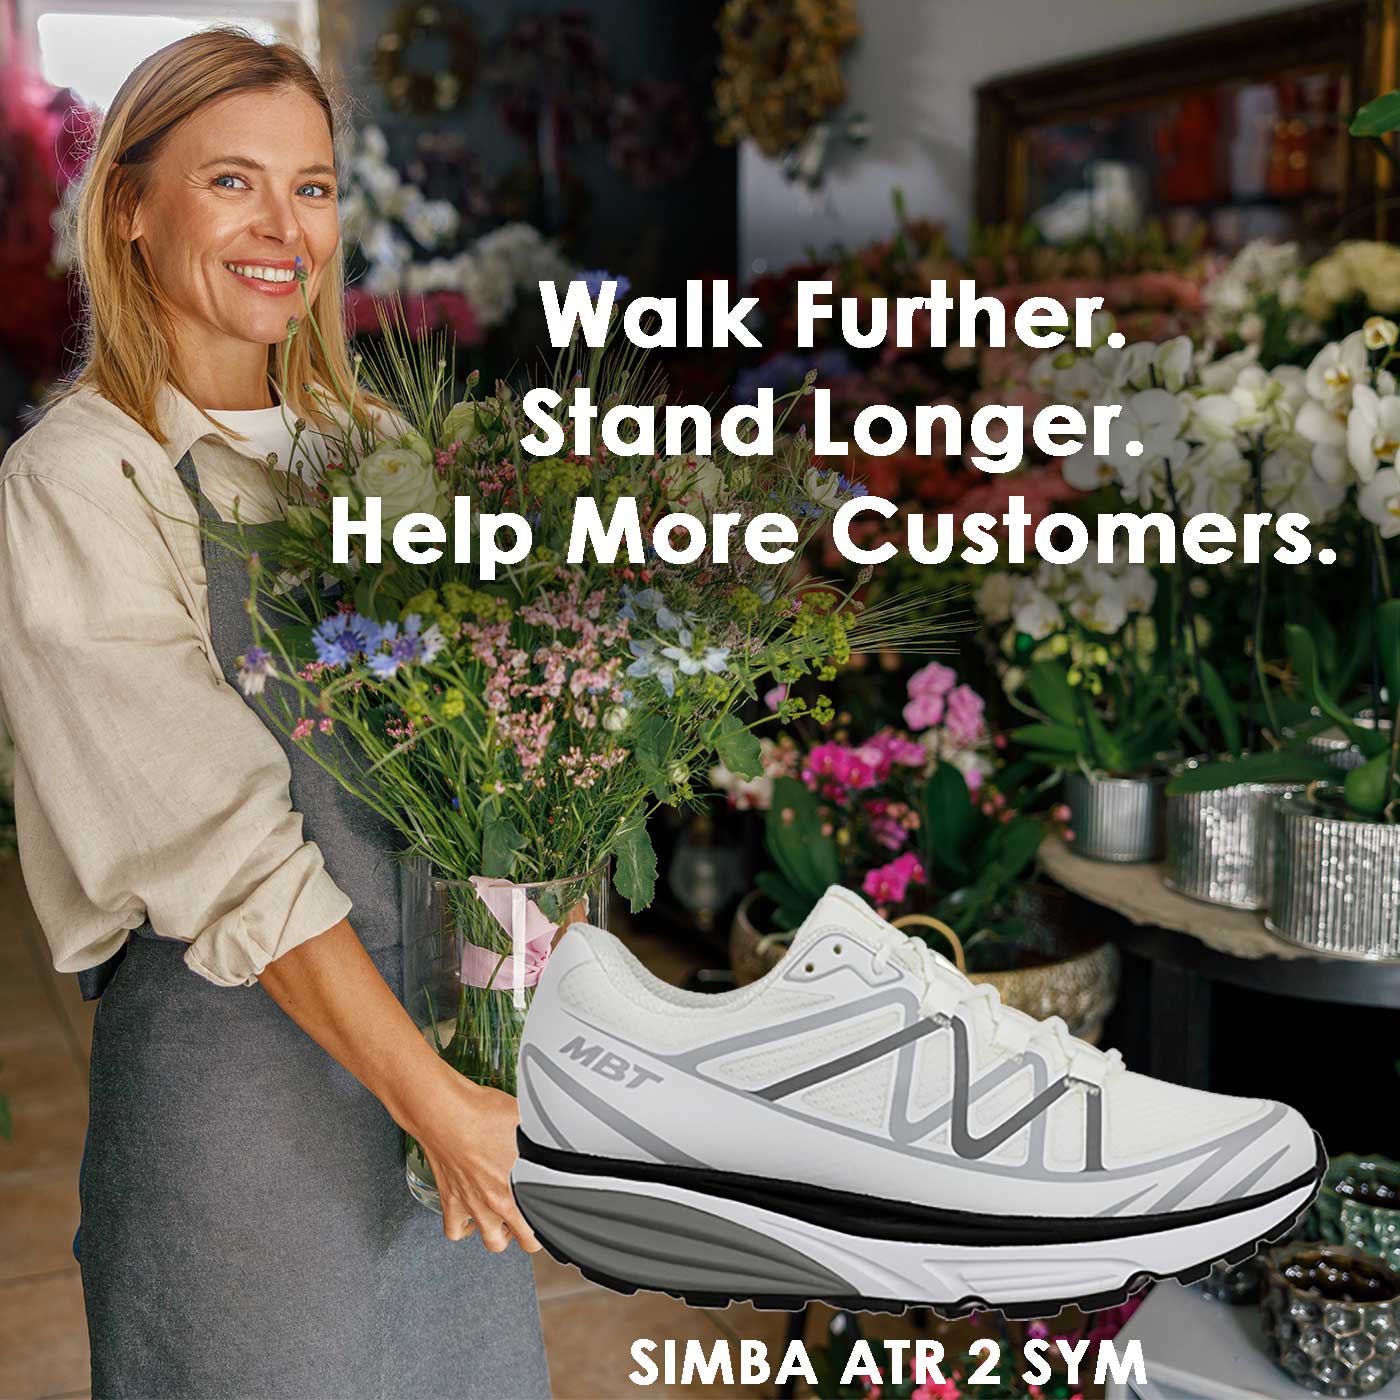 Simba ATR 2 Shoes Are Contain A Sympatex Liner Making Them Waterproof.